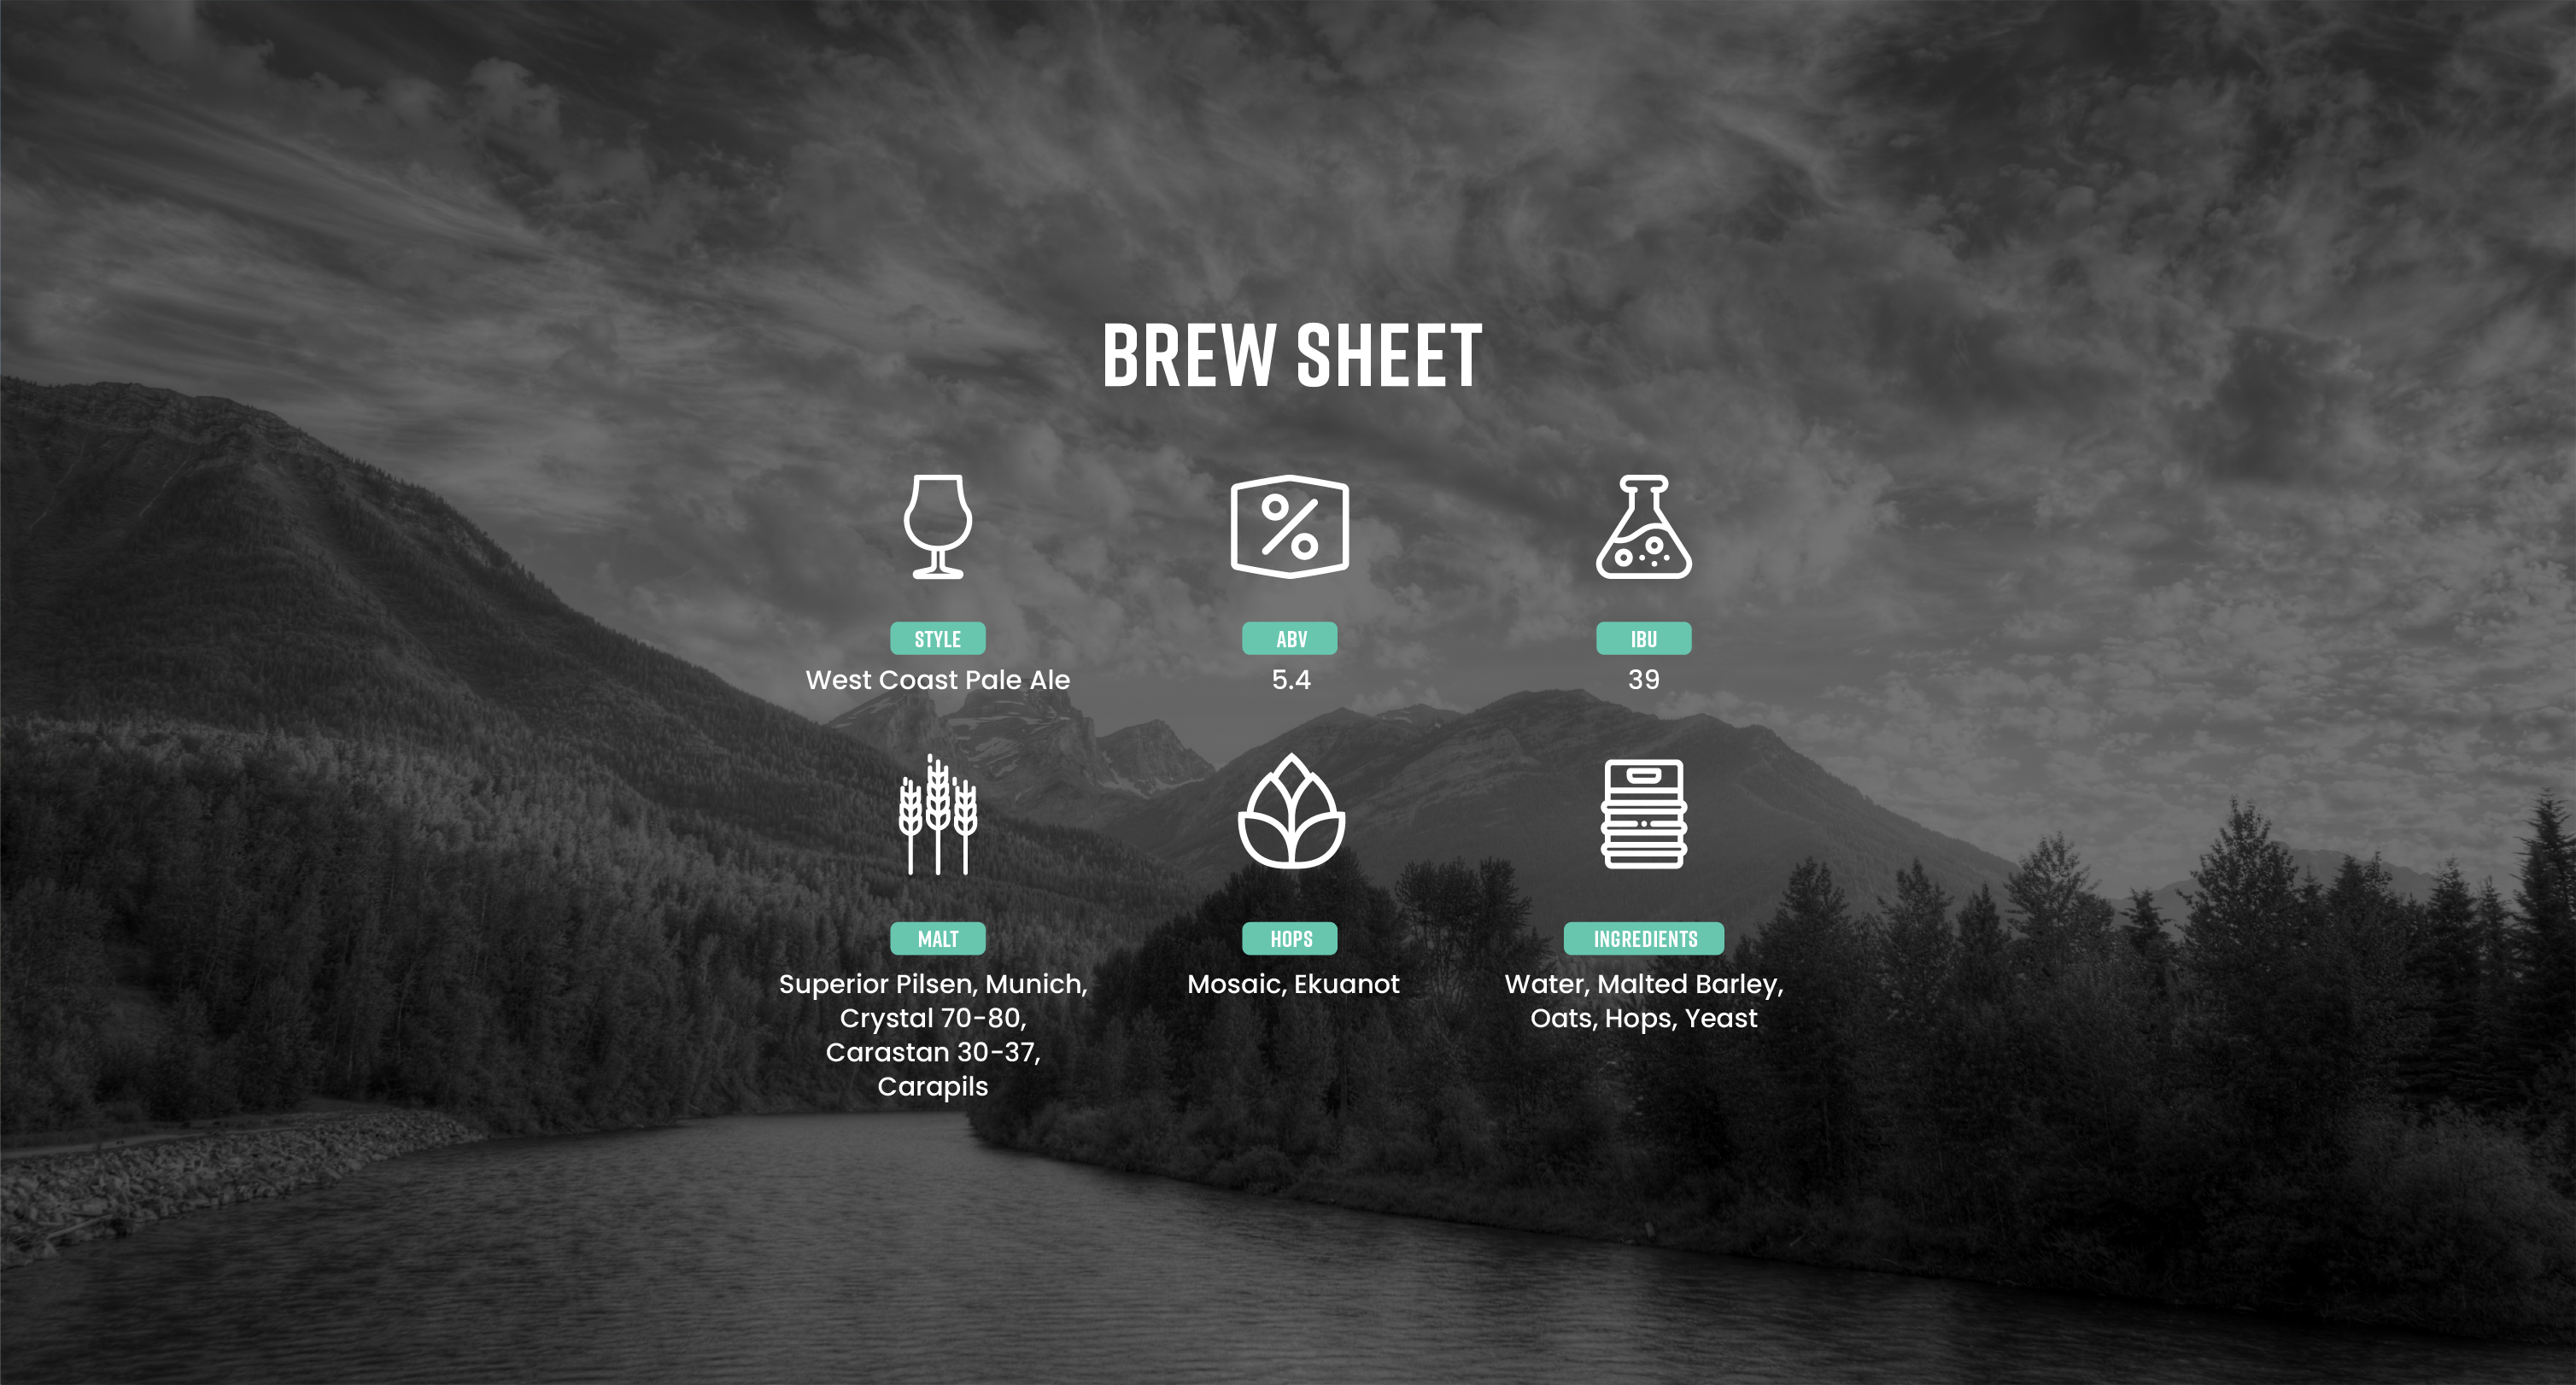 Brew Sheet of Campout